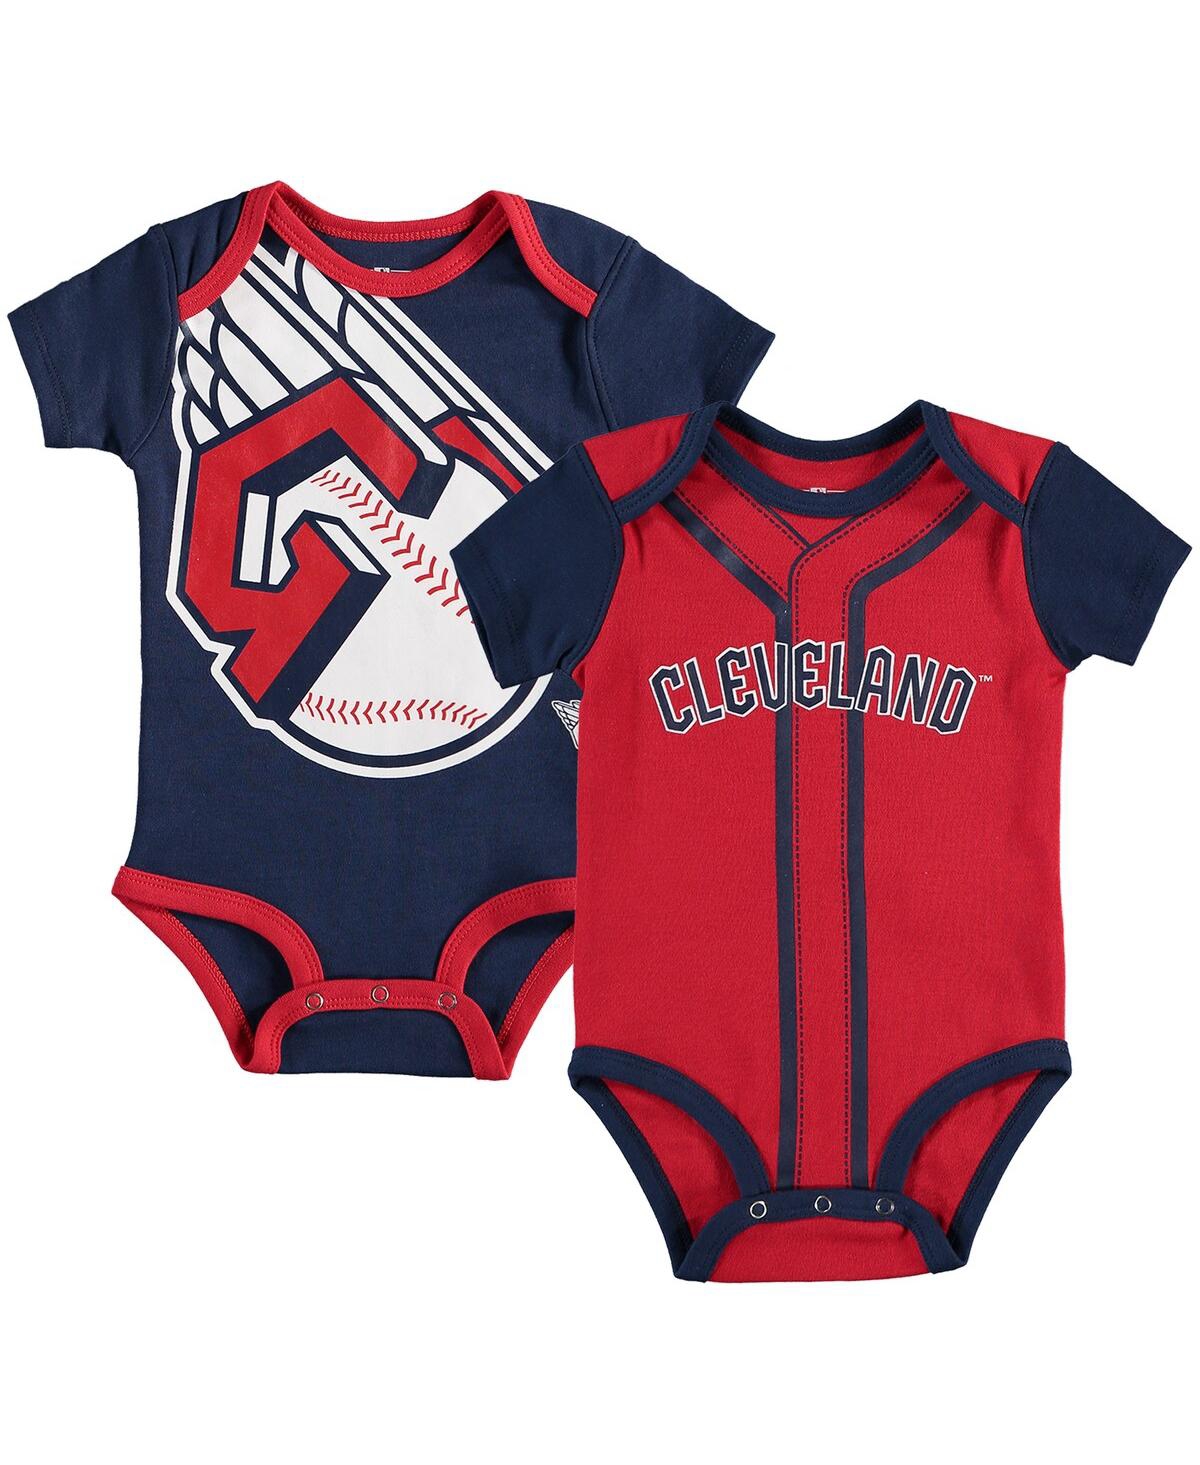 Outerstuff Babies' Infant Boys And Girls Navy, Red Cleveland Guardians Double 2-pack Bodysuit Set In Navy,red